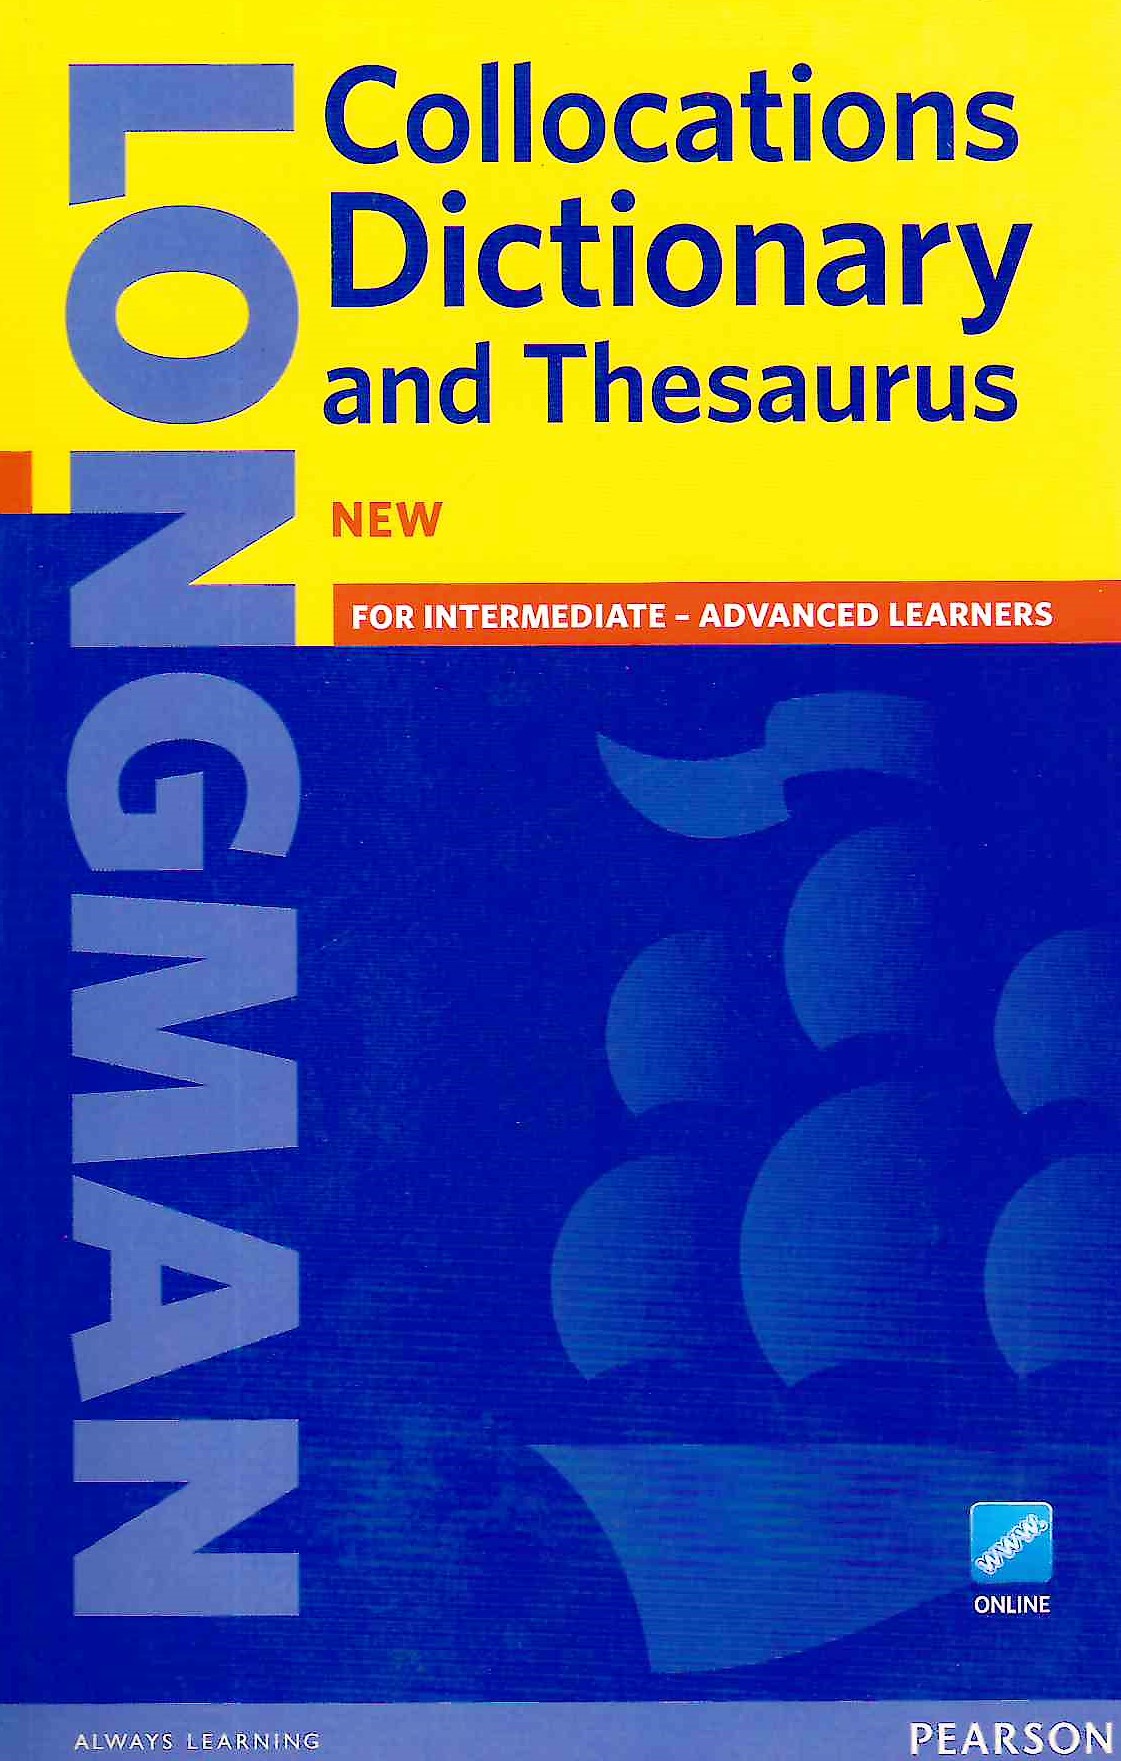 Longman Collocations Dictionary and Thesaurus + Online Code